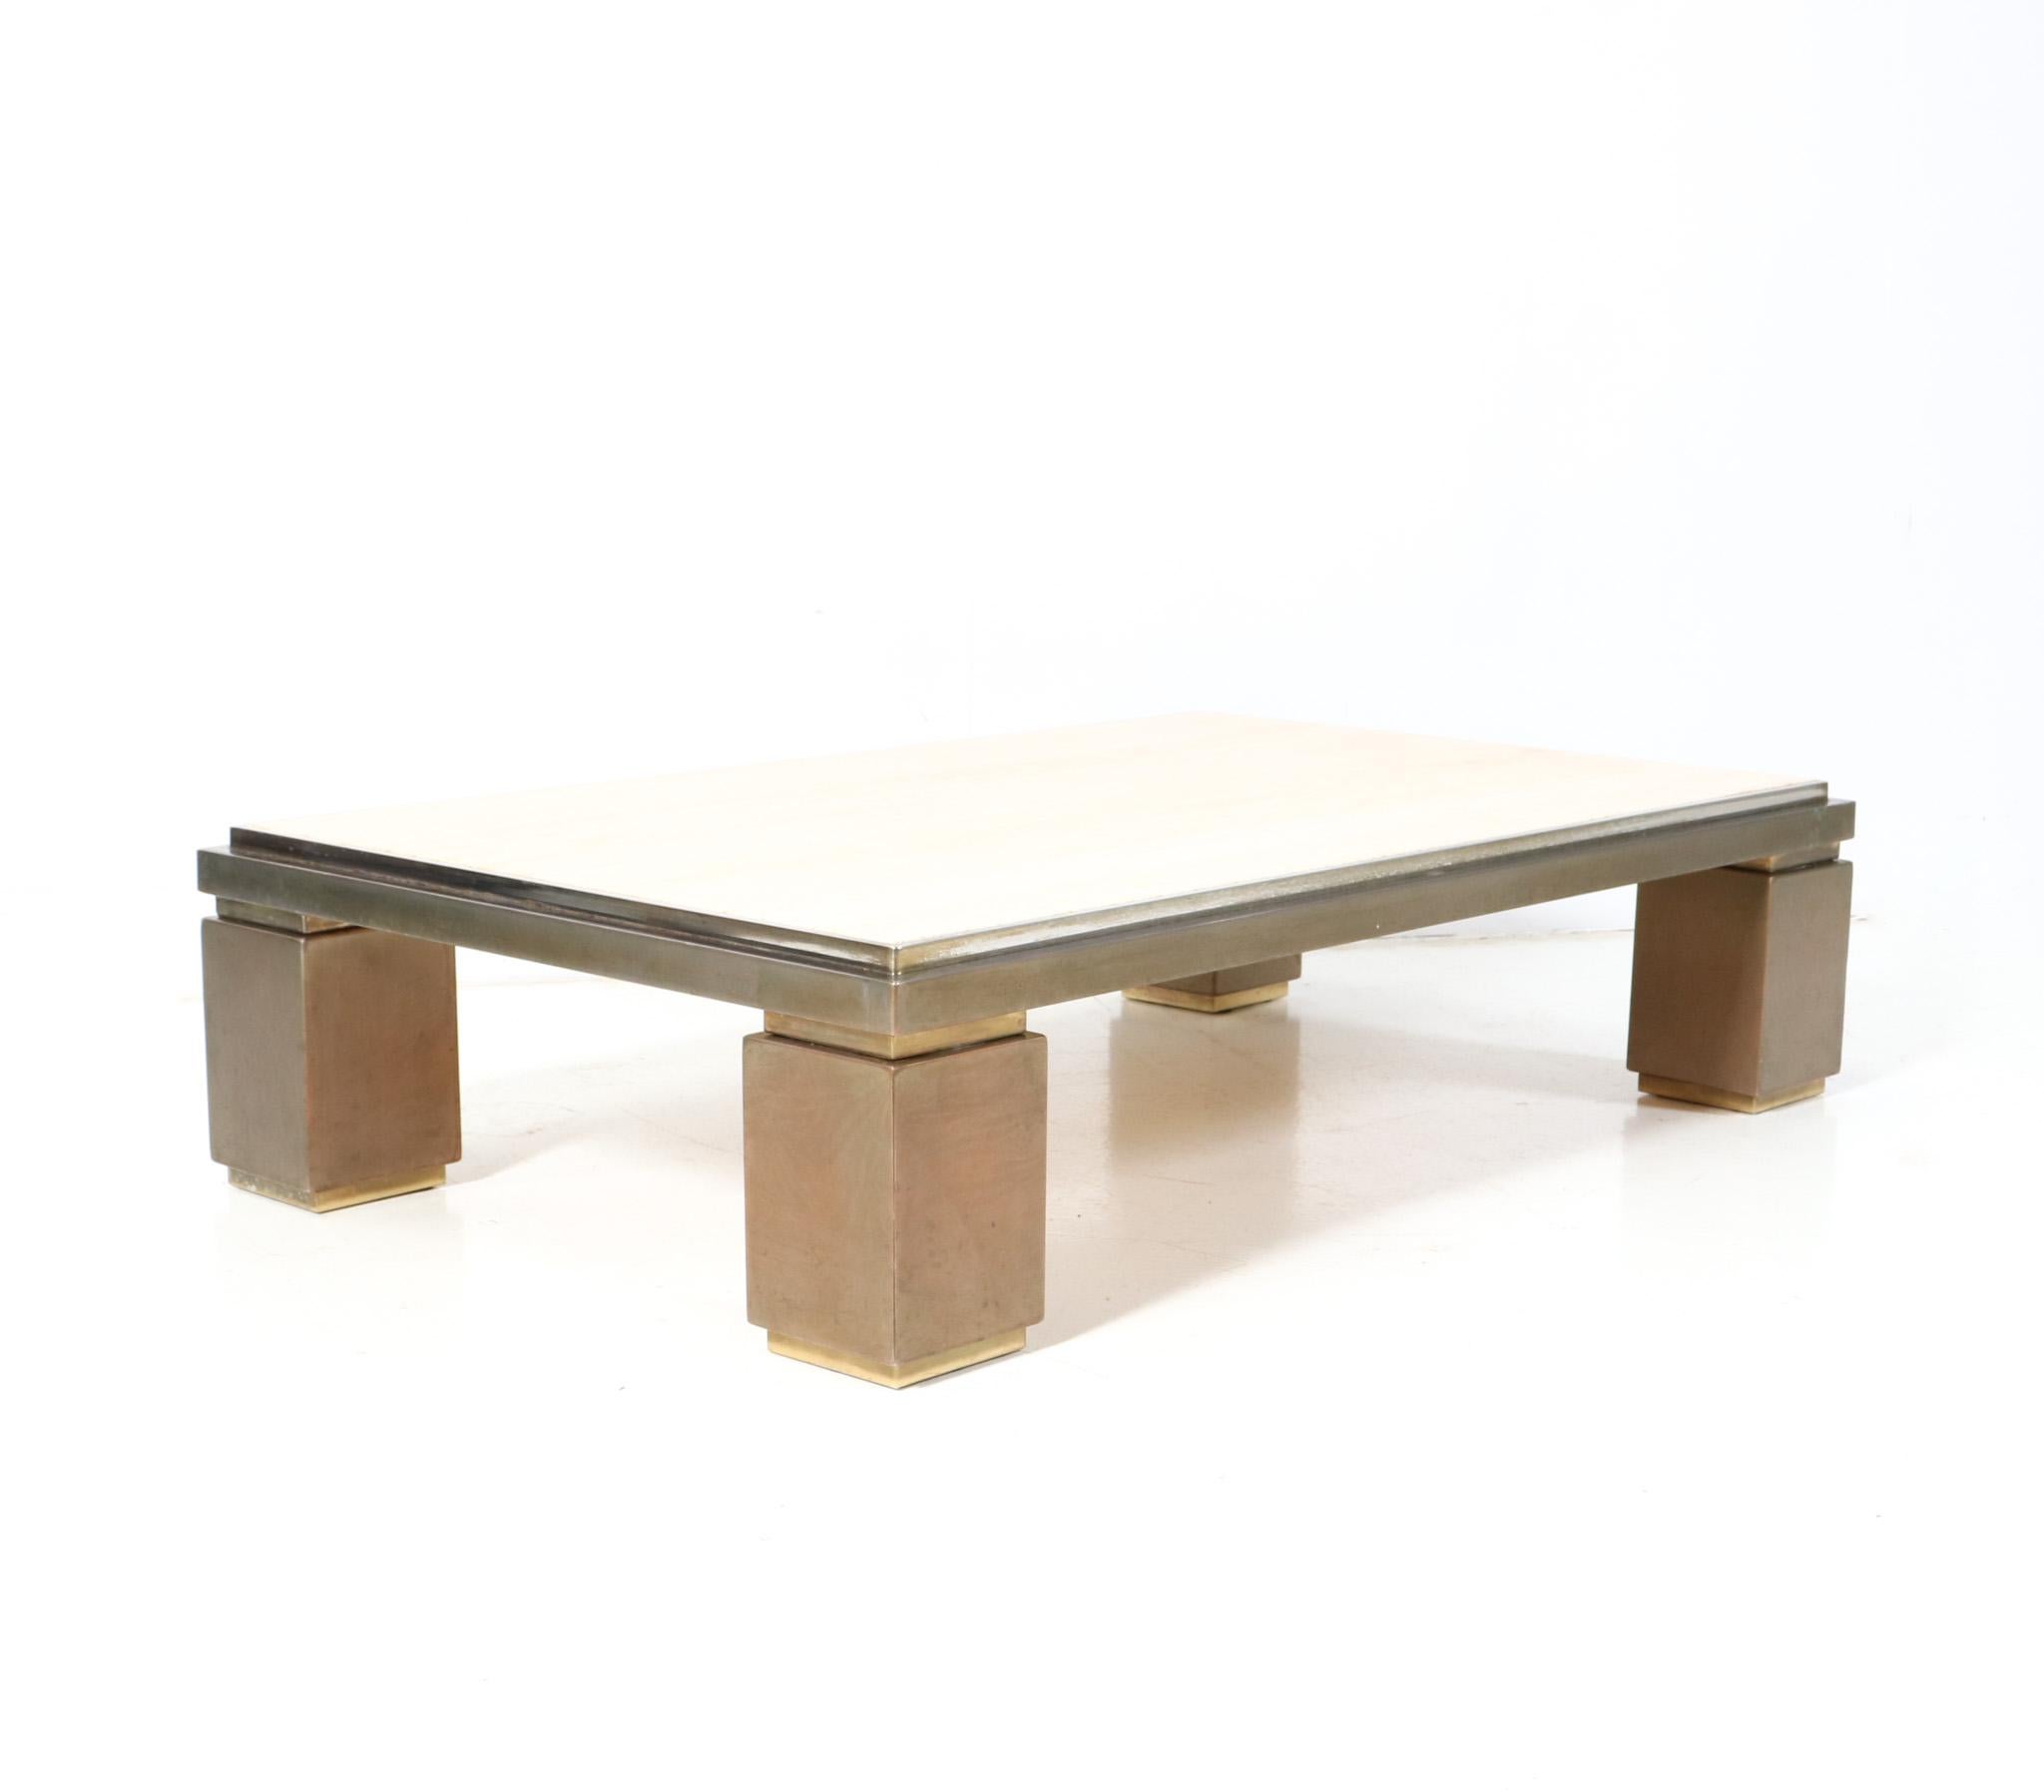 Magnificent and rare Hollywood Regency large coffee table.
Design by Belgo Chrome.
Striking Belgium design from the 1970s.
Original patinated brass frame with original travertine top.
This wonderful Hollywood Regency large coffee table by Belgo